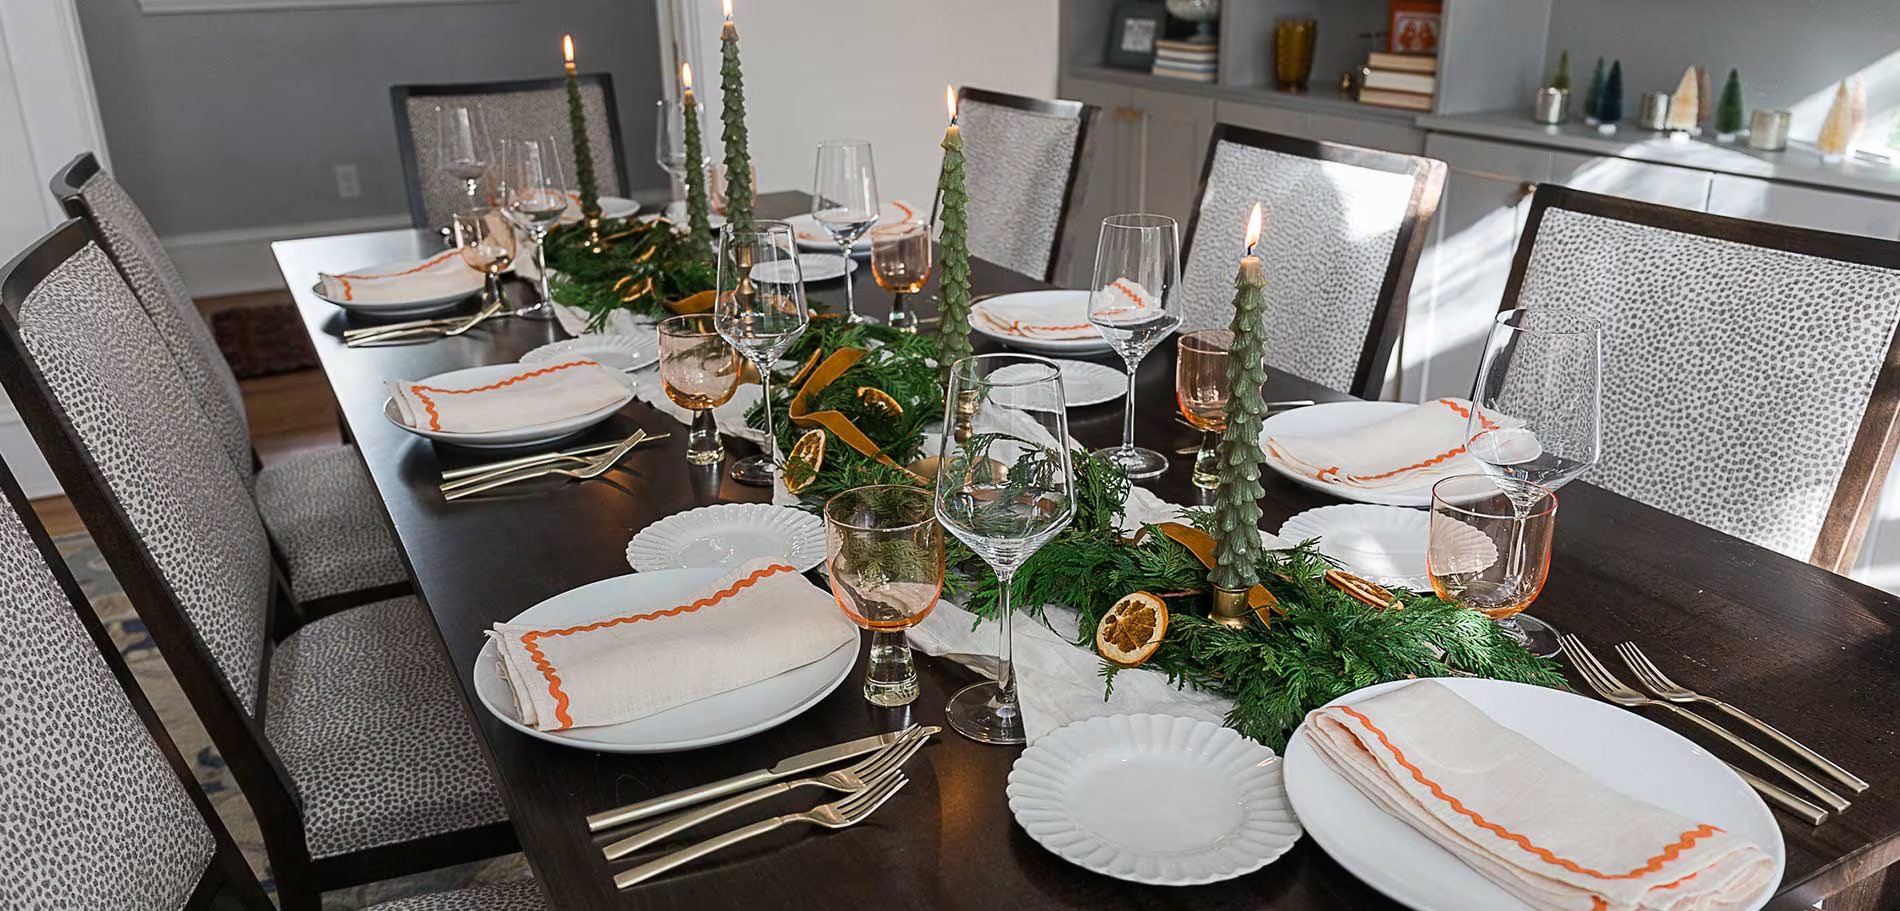 Dining Room Setting for the Holidays